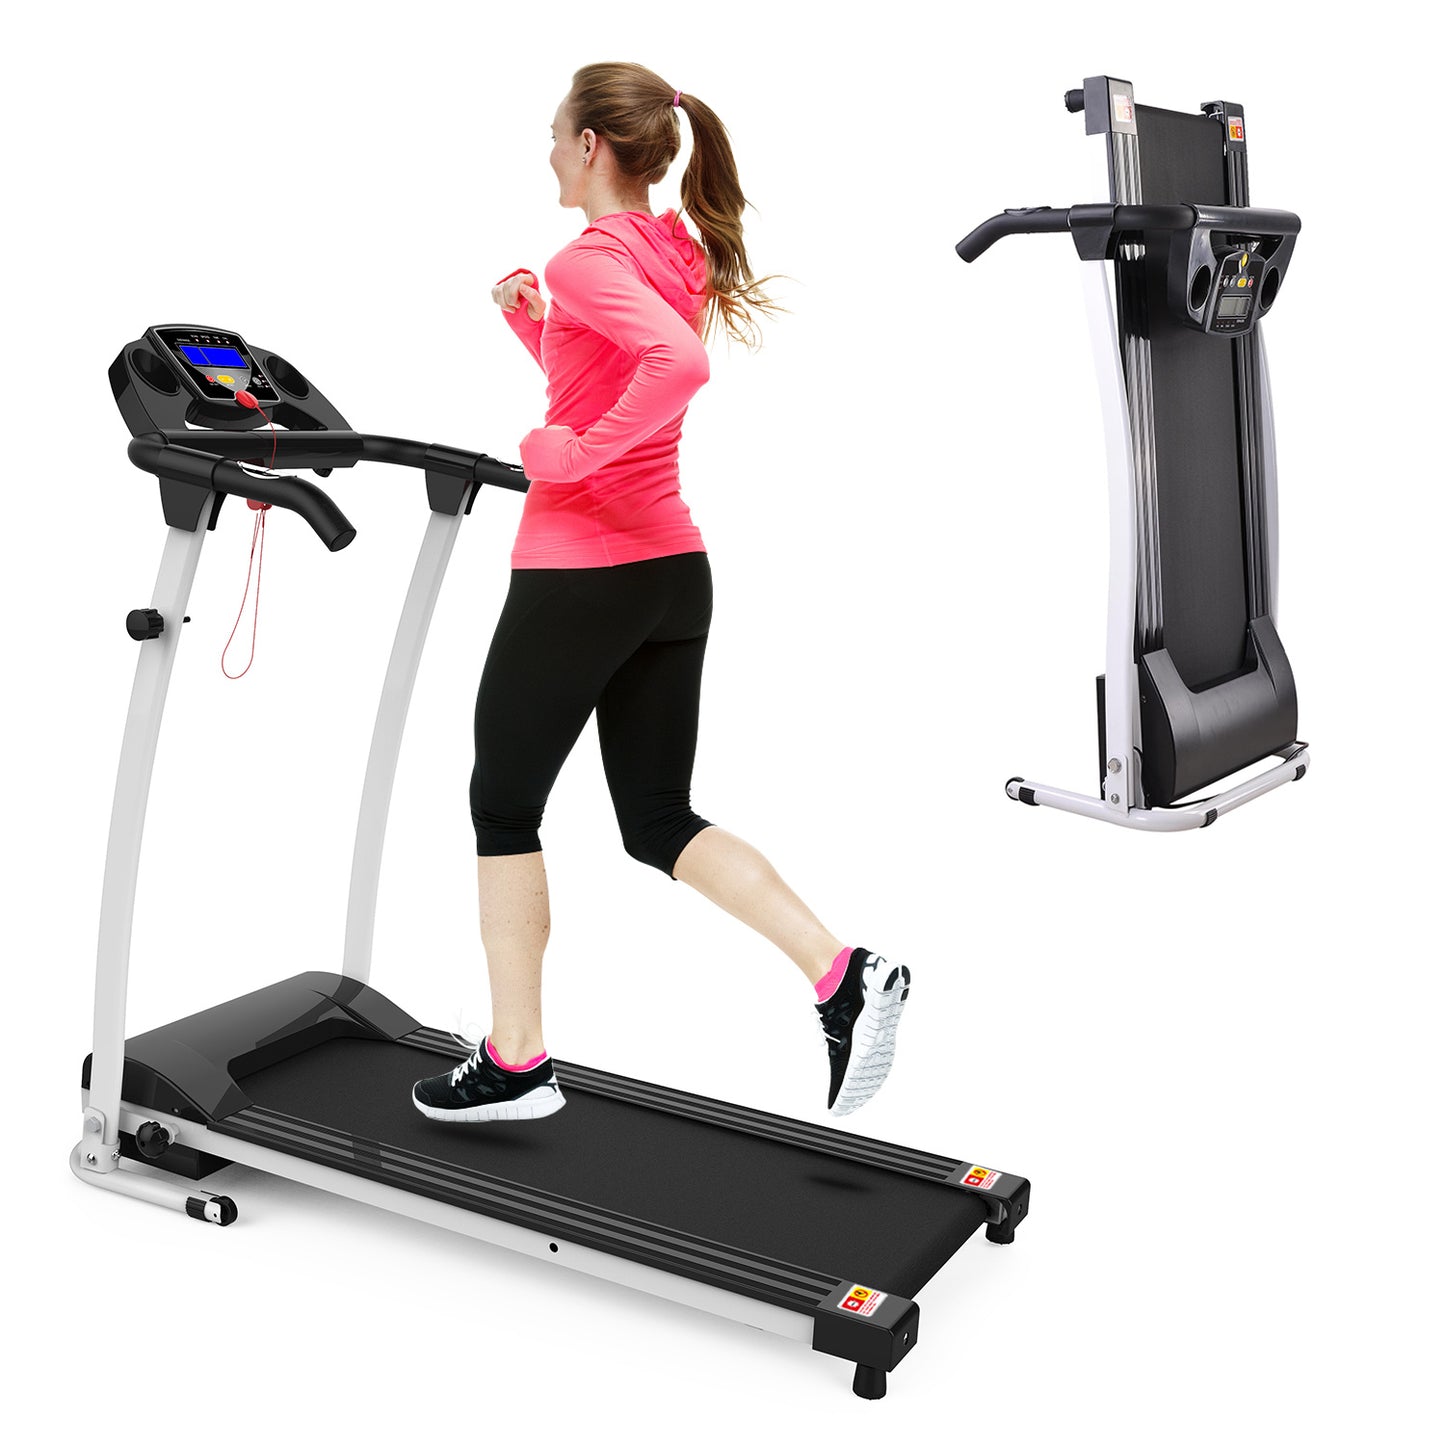 FYC Folding Treadmills for Home;  Foldable Electric Treadmill with LCD display;  Lightweight Compact Treadmill Fitness Running Walking Jogging Exercise for Home Office Apartment Saver Space